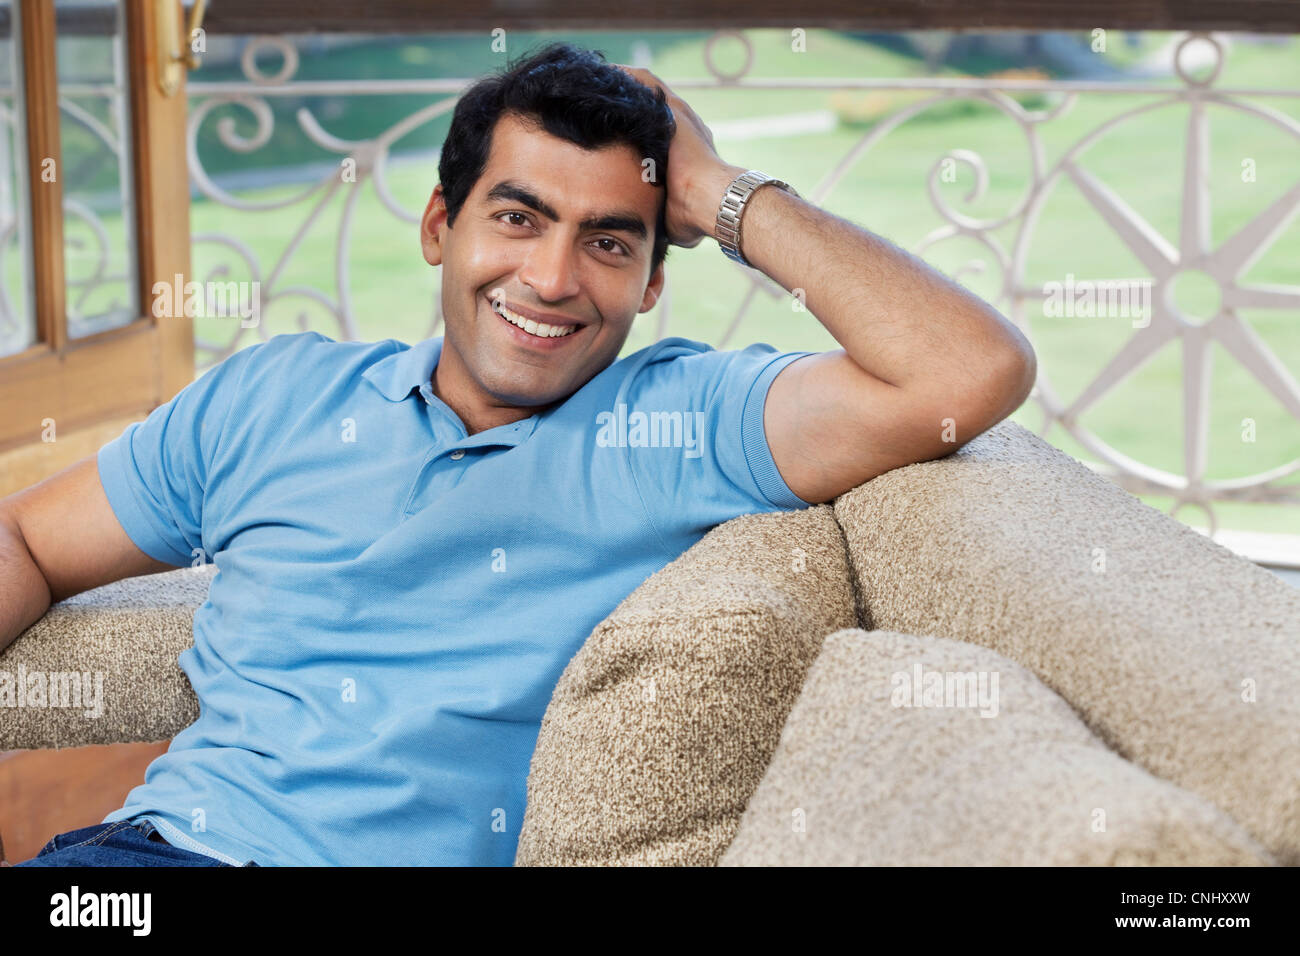 Portrait of a man sitting on a sofa Stock Photo